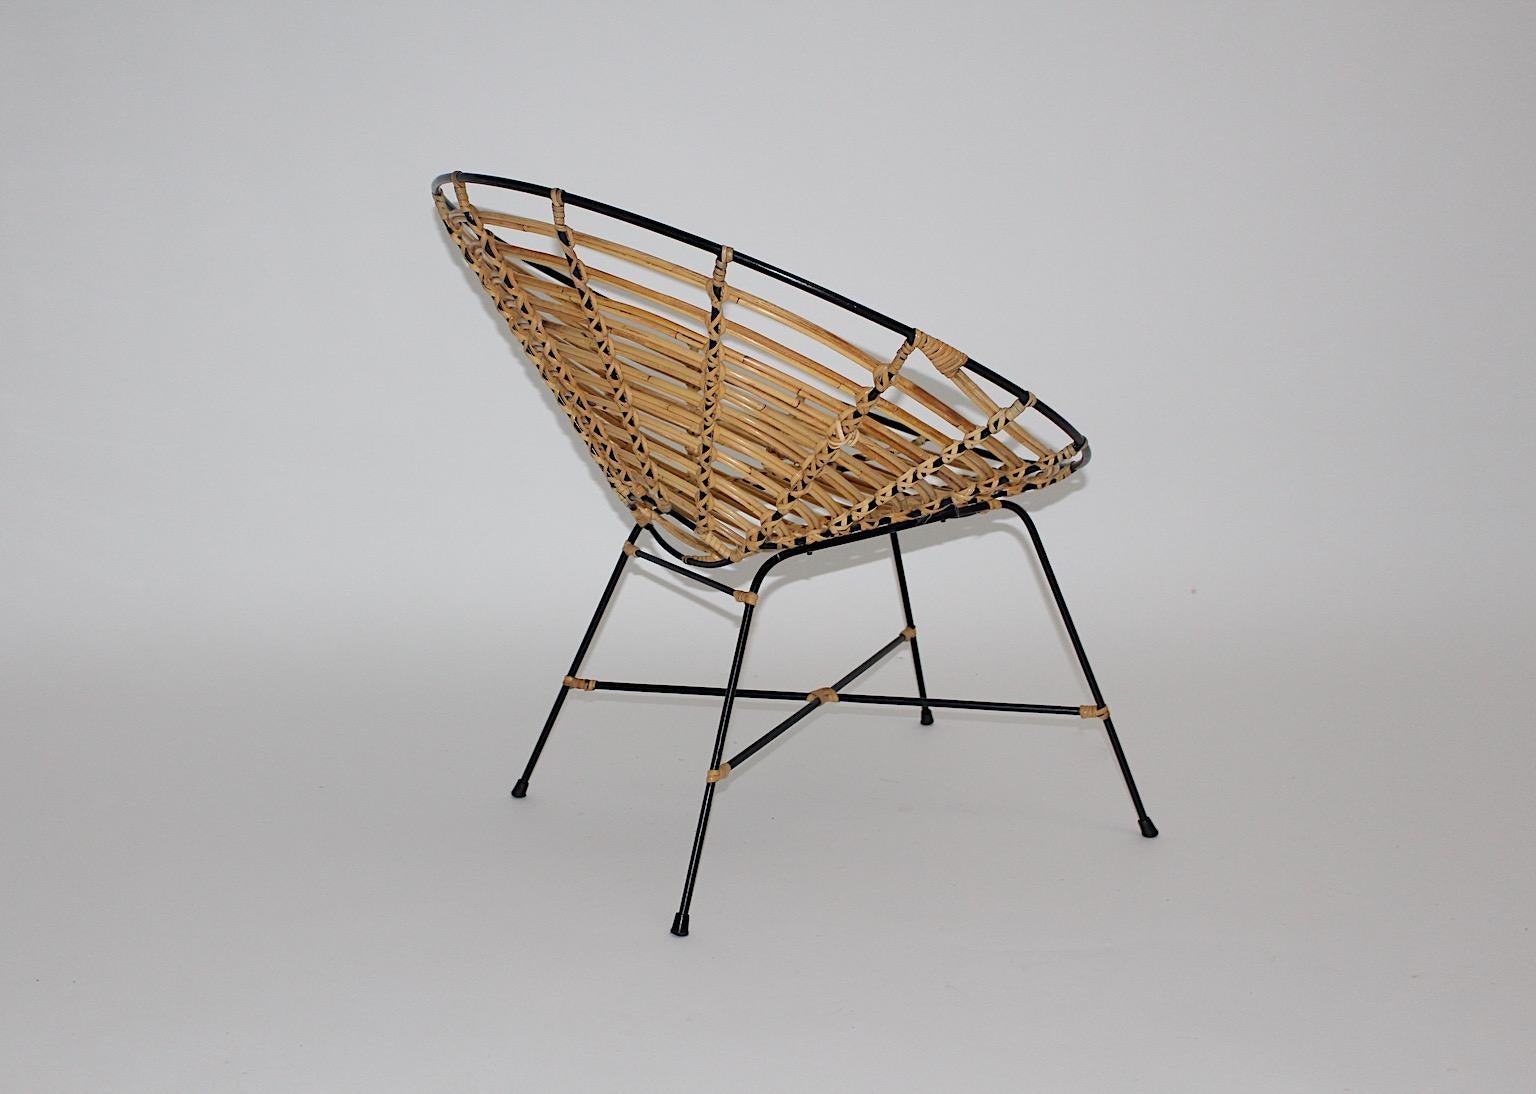 Bamboo Rattan Brown Vintage Mid-Century Modern Lounge Chair, Italy, 1960s For Sale 2